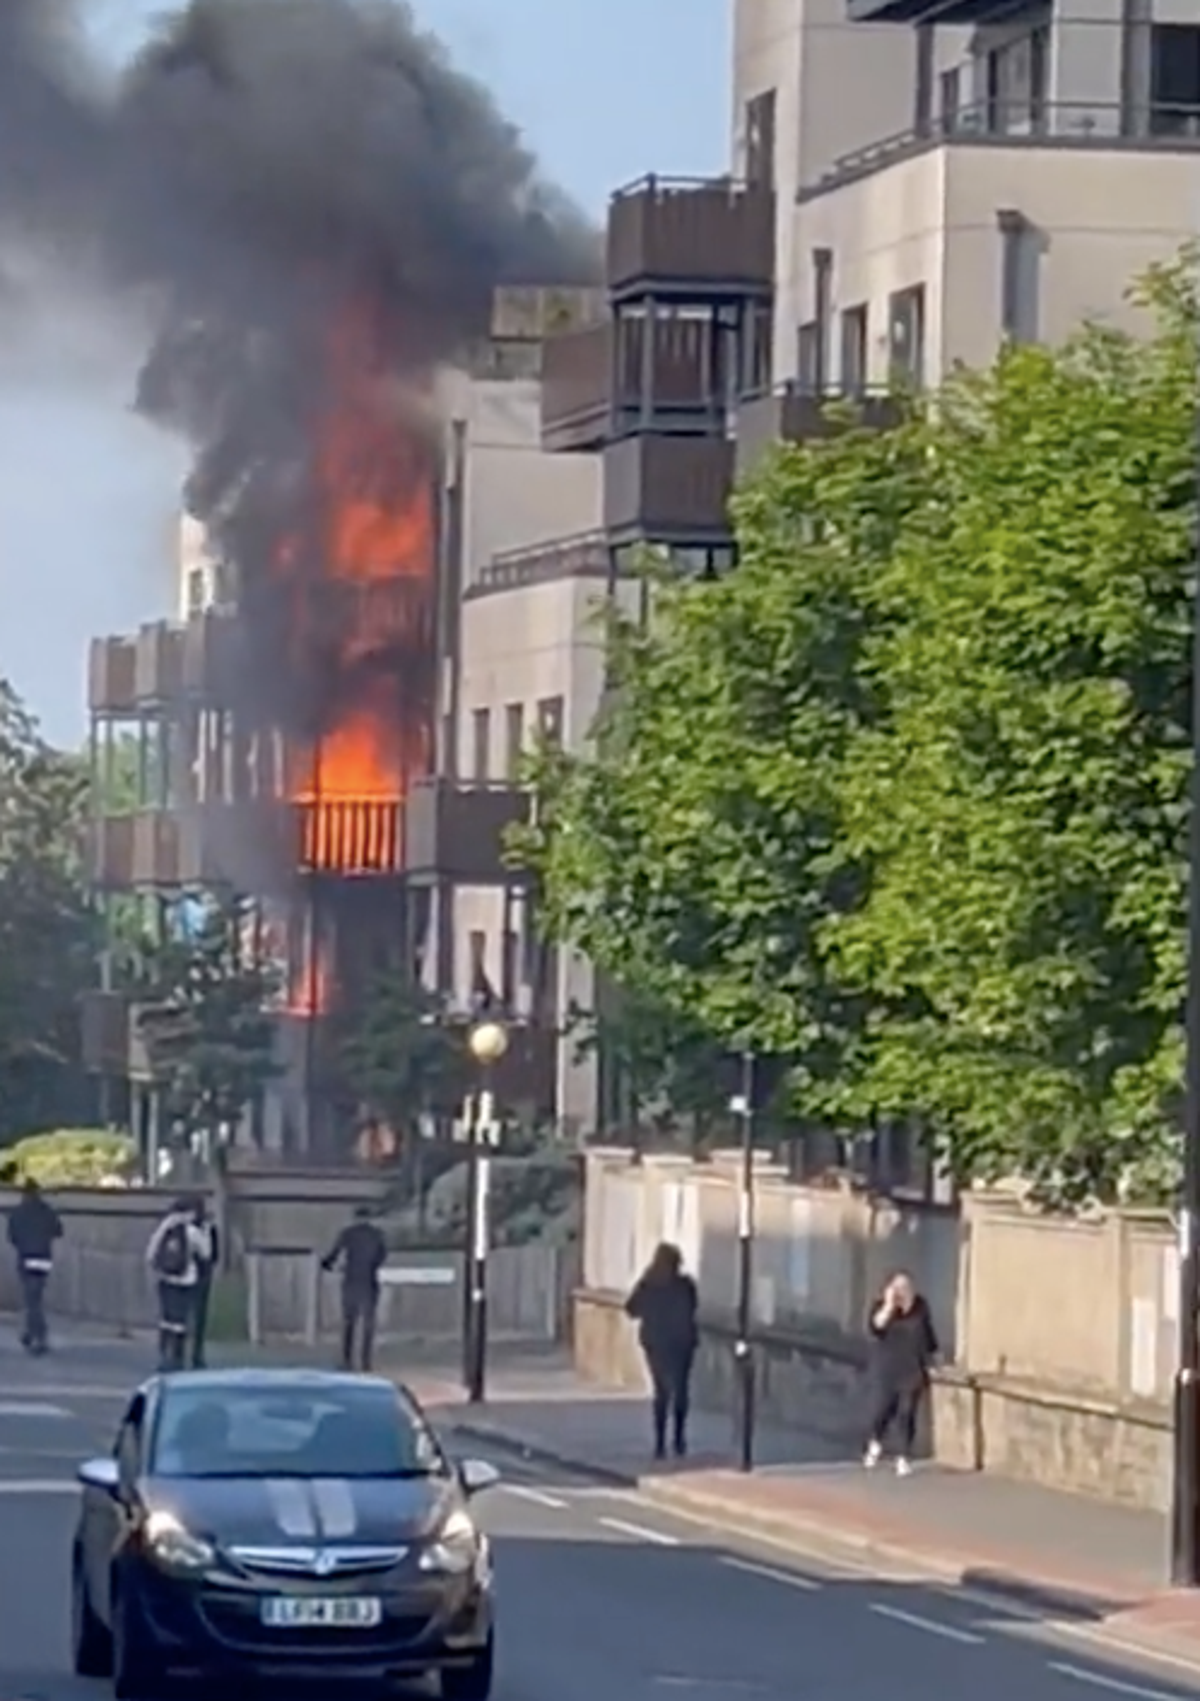 Croydon fire: Huge blaze at block of flats as 60 firefighters tackle flames